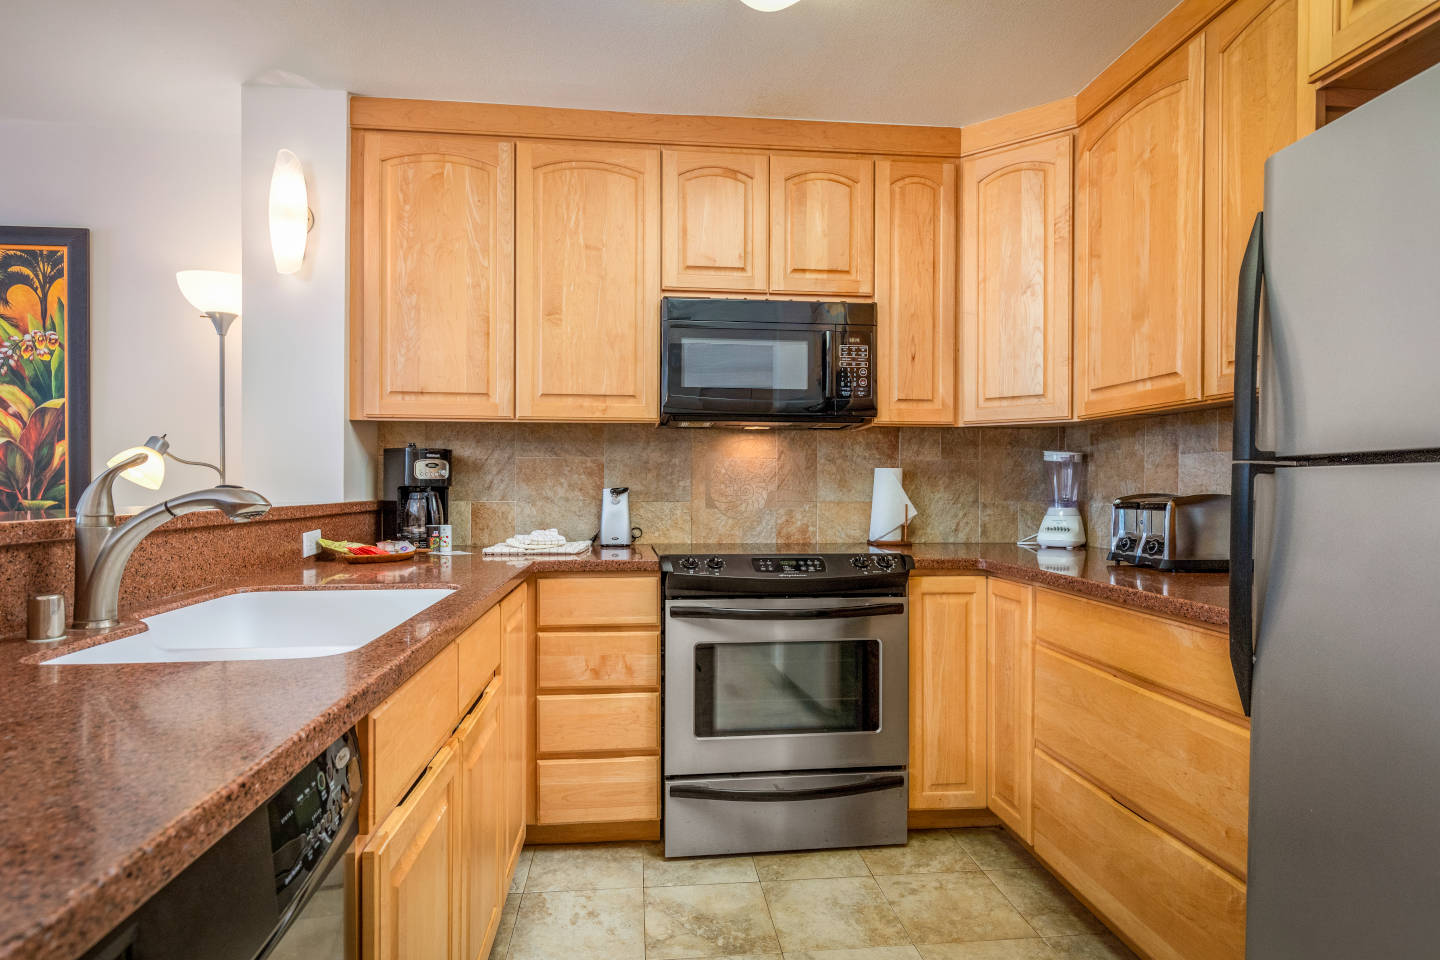 One-Bedroom Ocean View Kitchen spacious with full-size oven and refrigerator